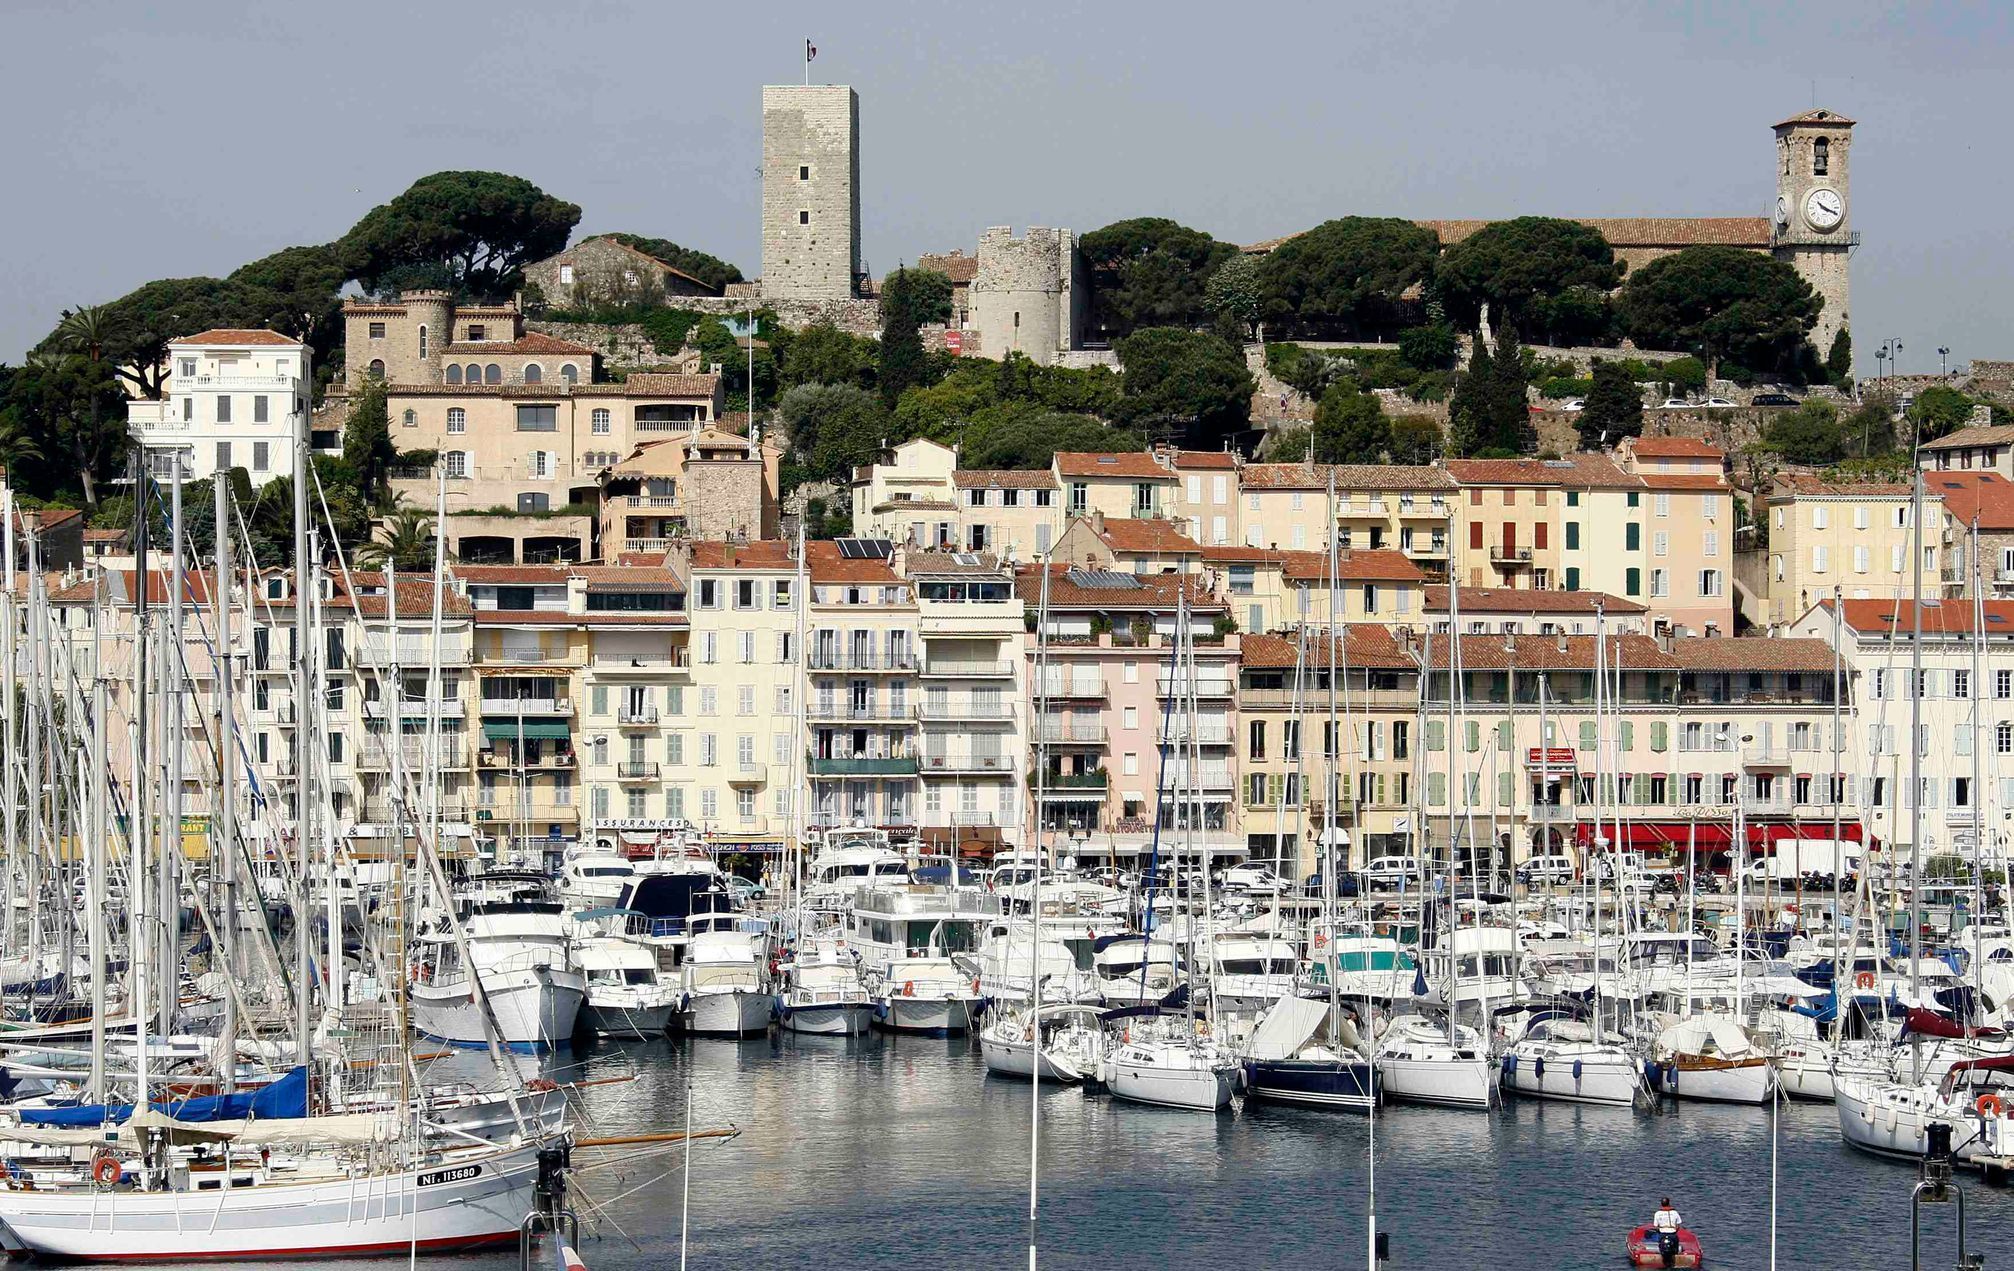 File photo of luxury yachts and boats mooring in the port of Cannes